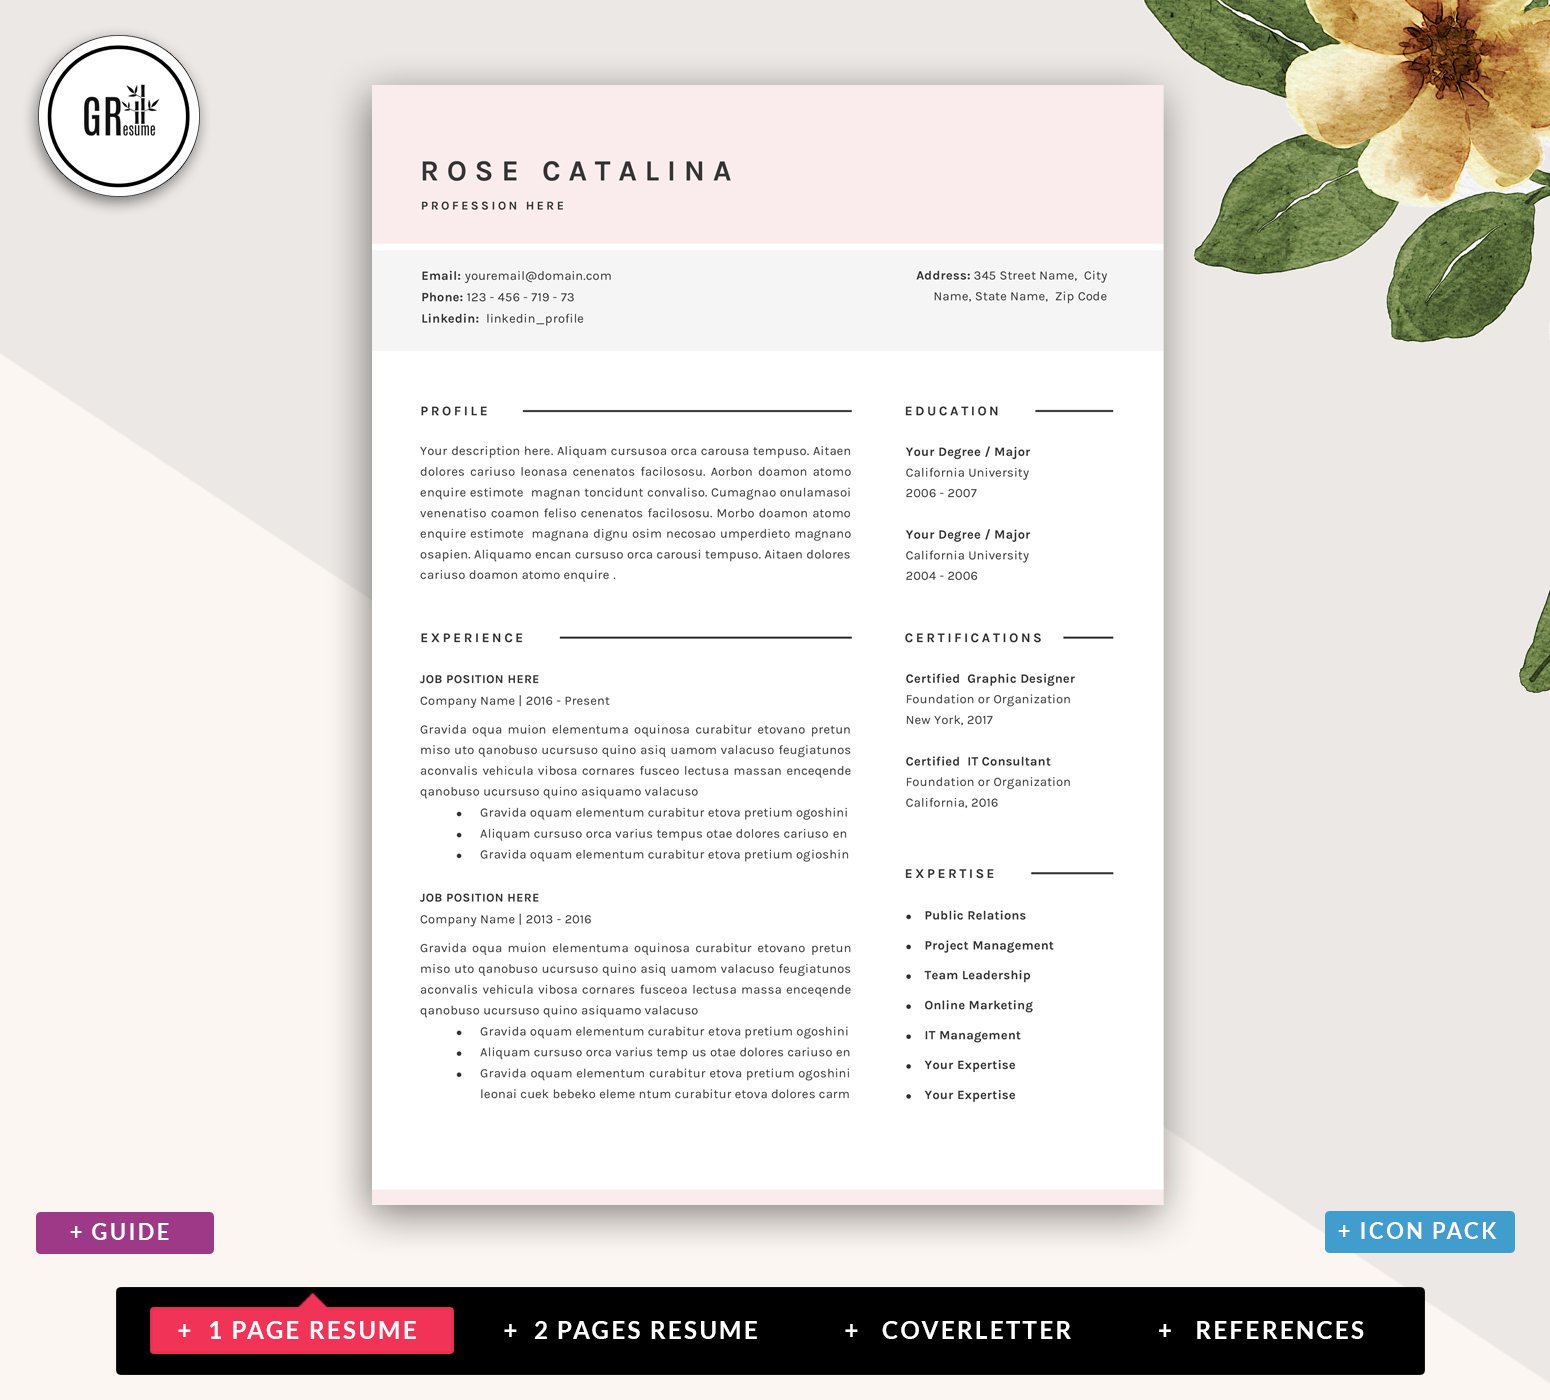 Professional Resume Template - Word preview image.